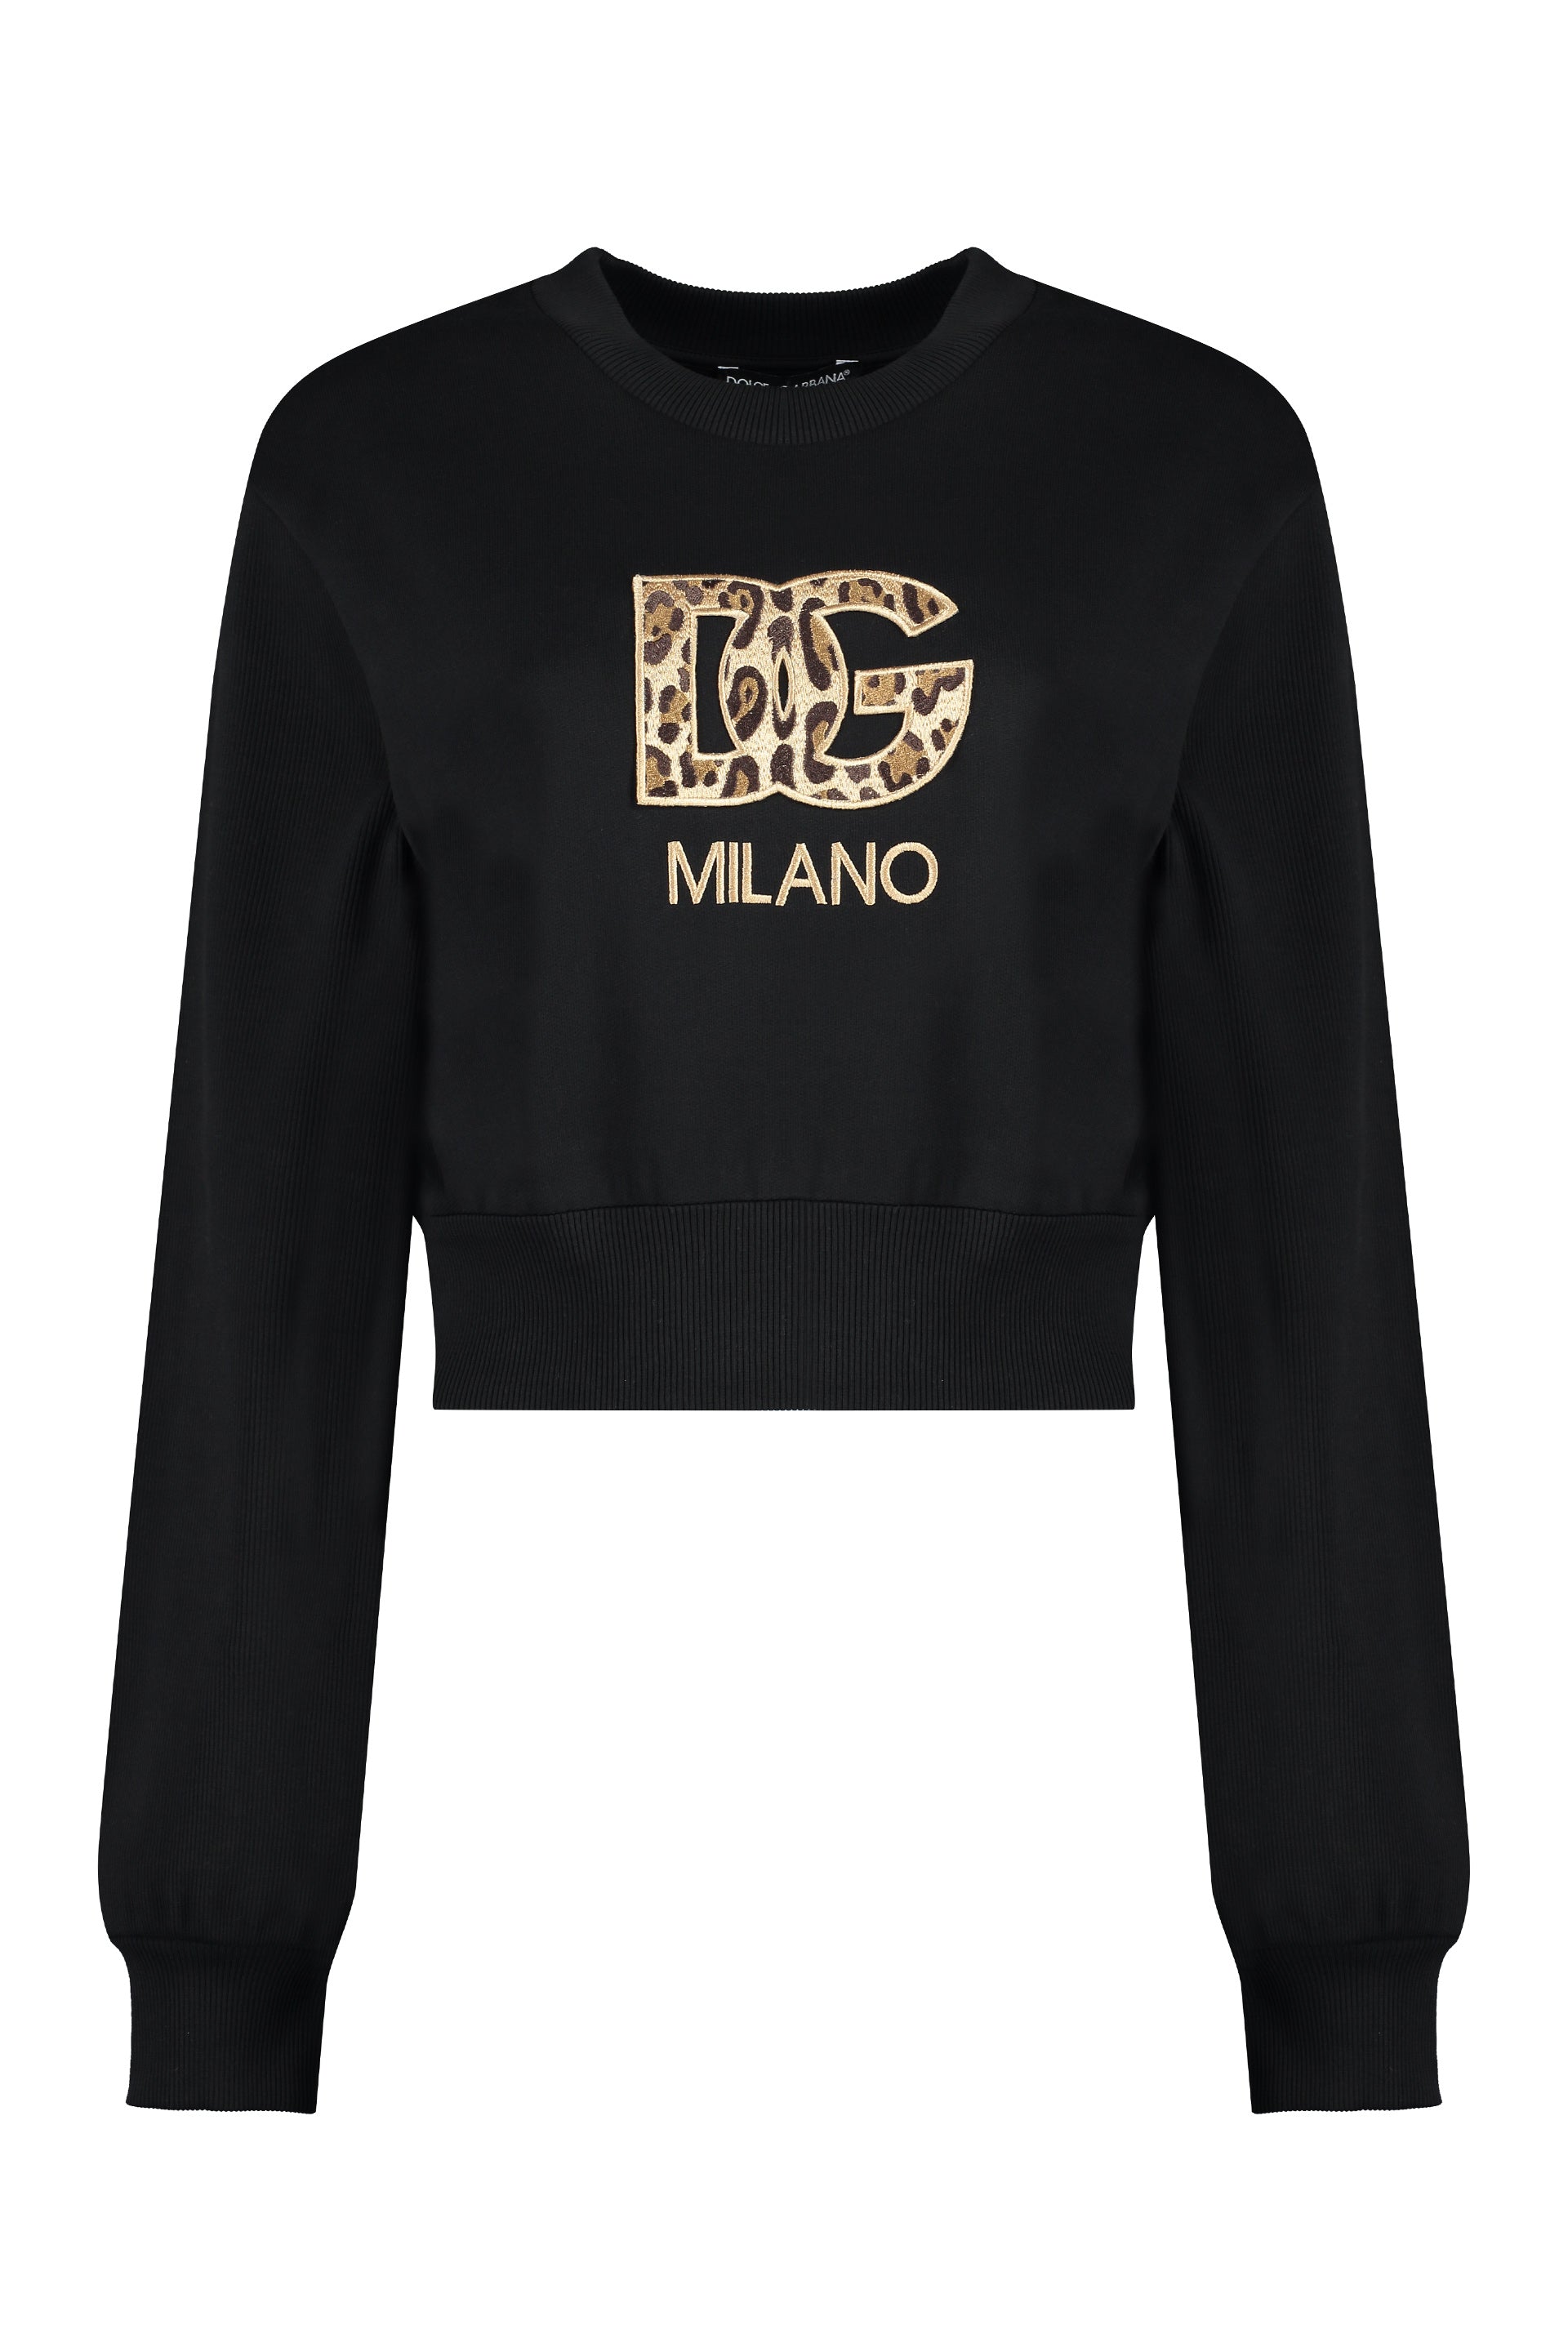 Dolce & Gabbana Black Cotton Sweatshirt With Logo Detail And Cropped Length For Women